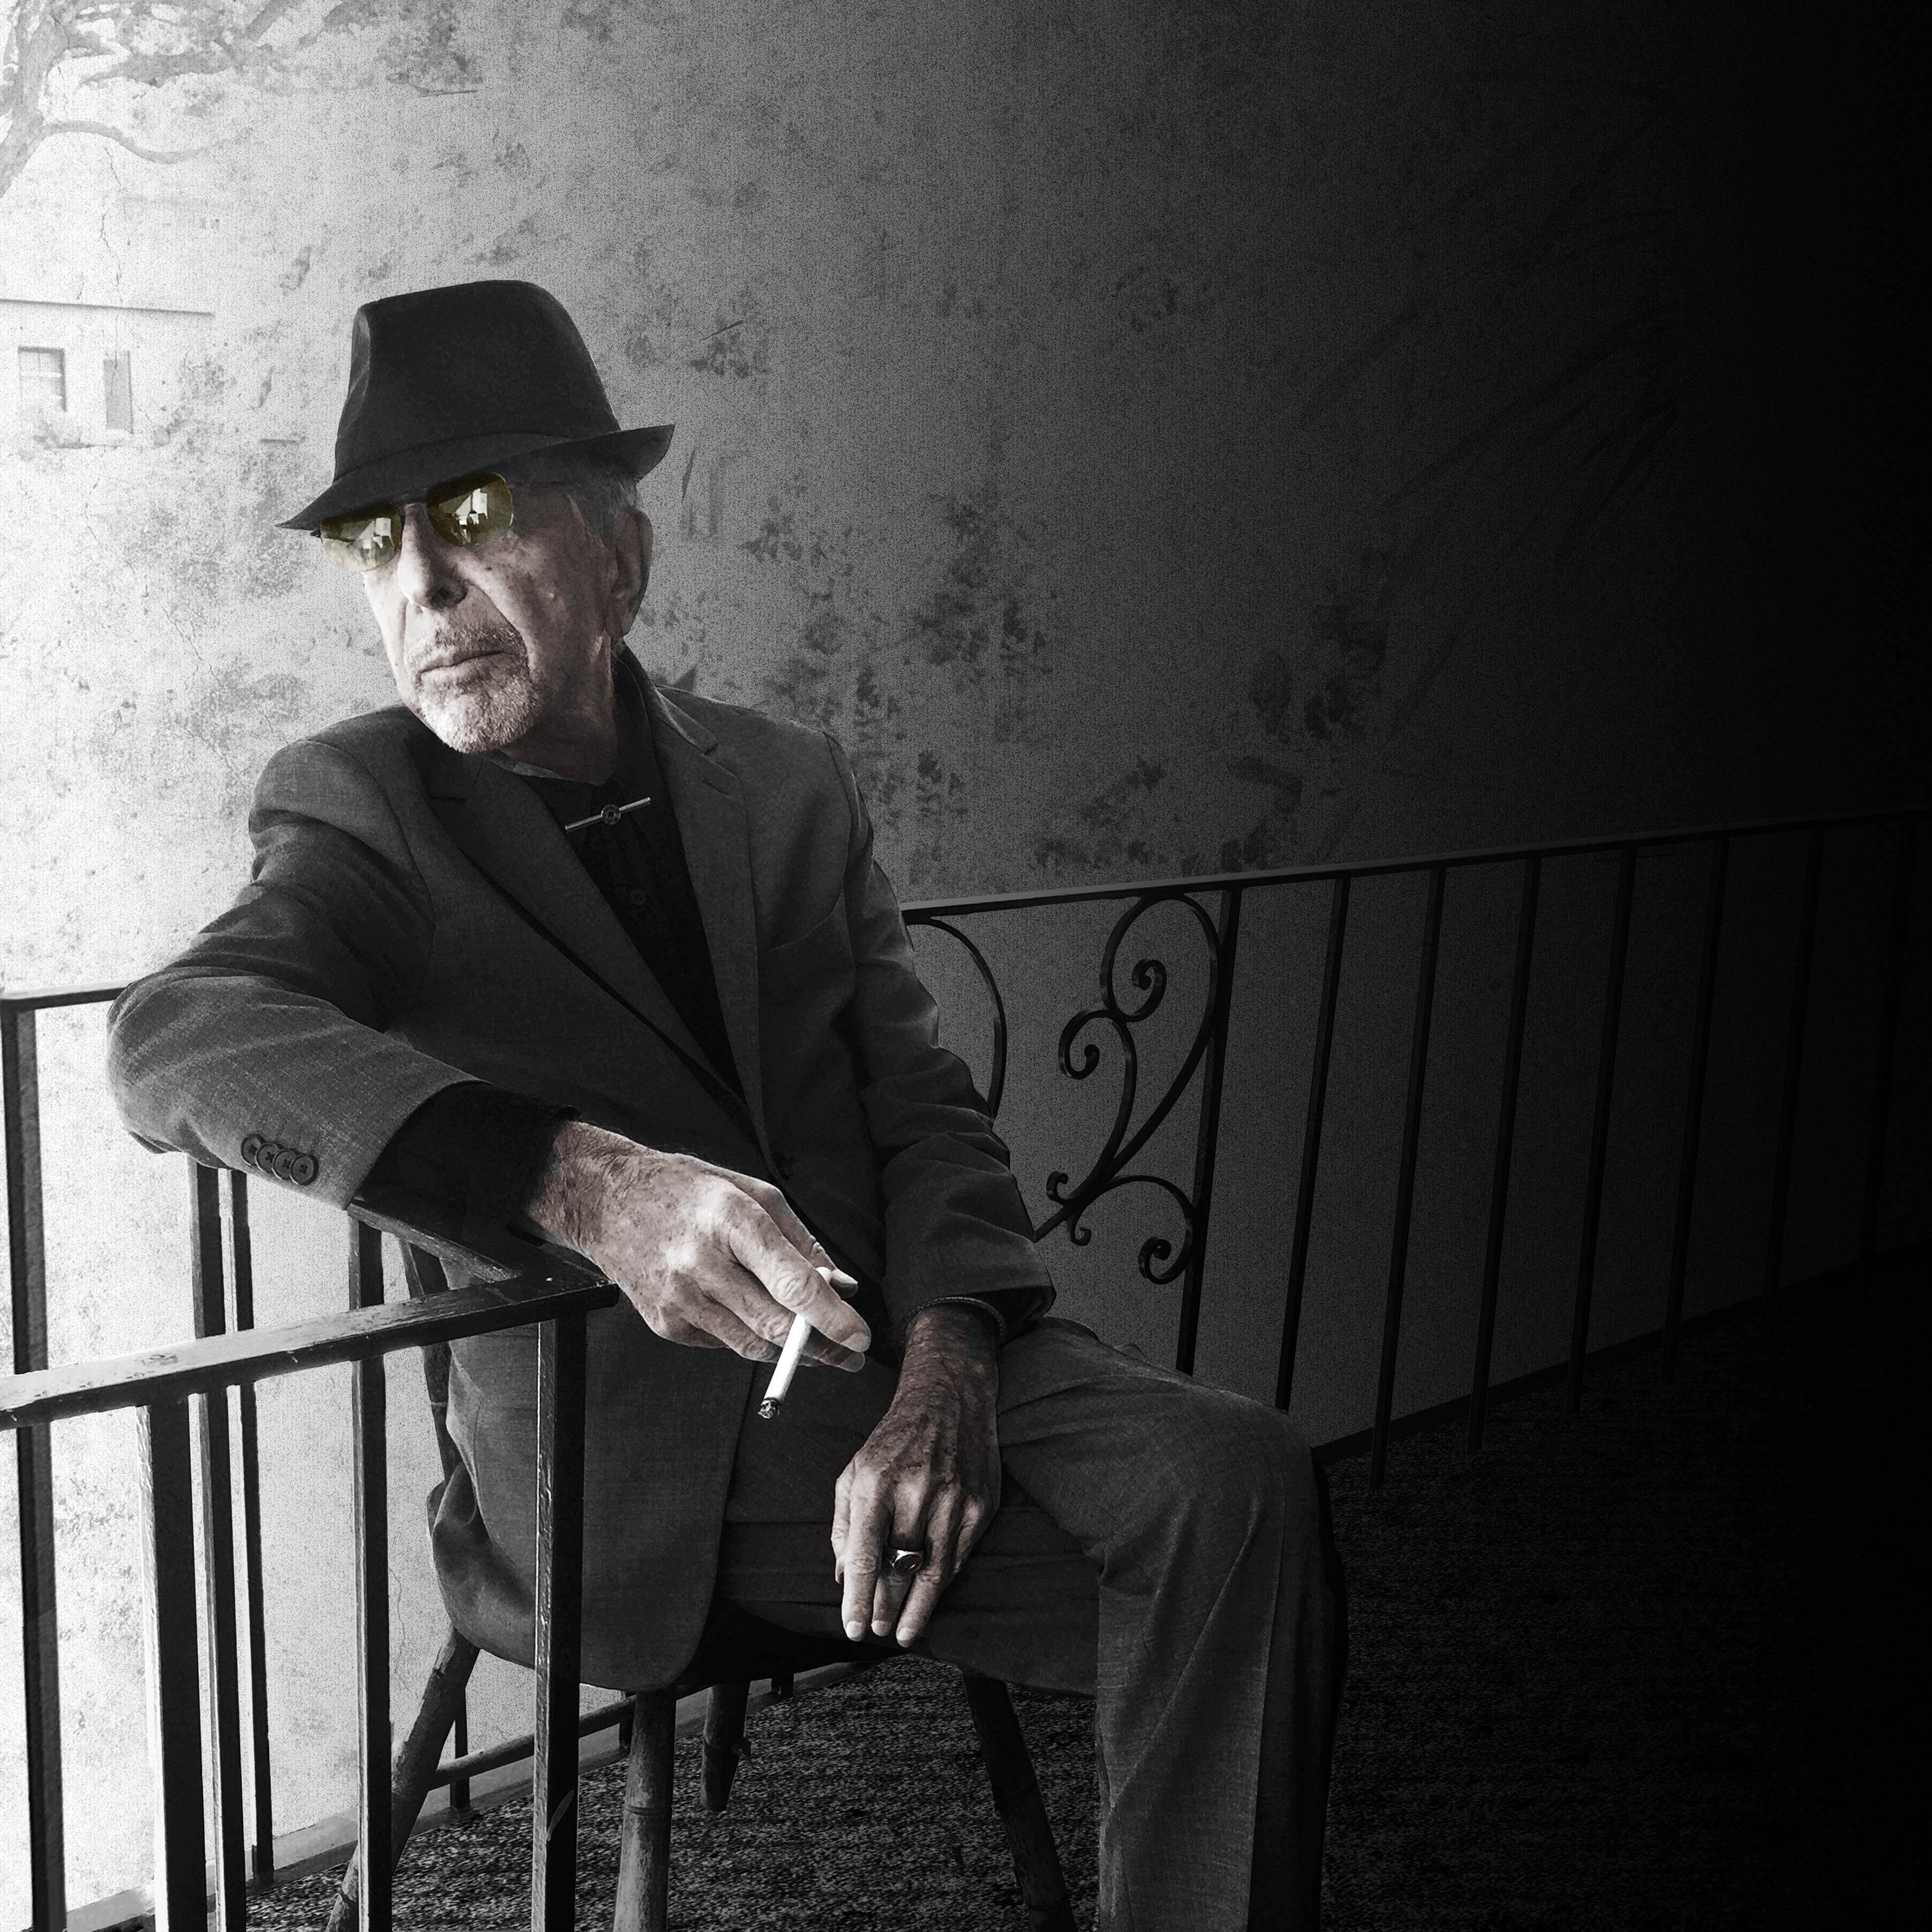 Music Legend Leonard Cohen’s Concert Documentary Coming to Theaters